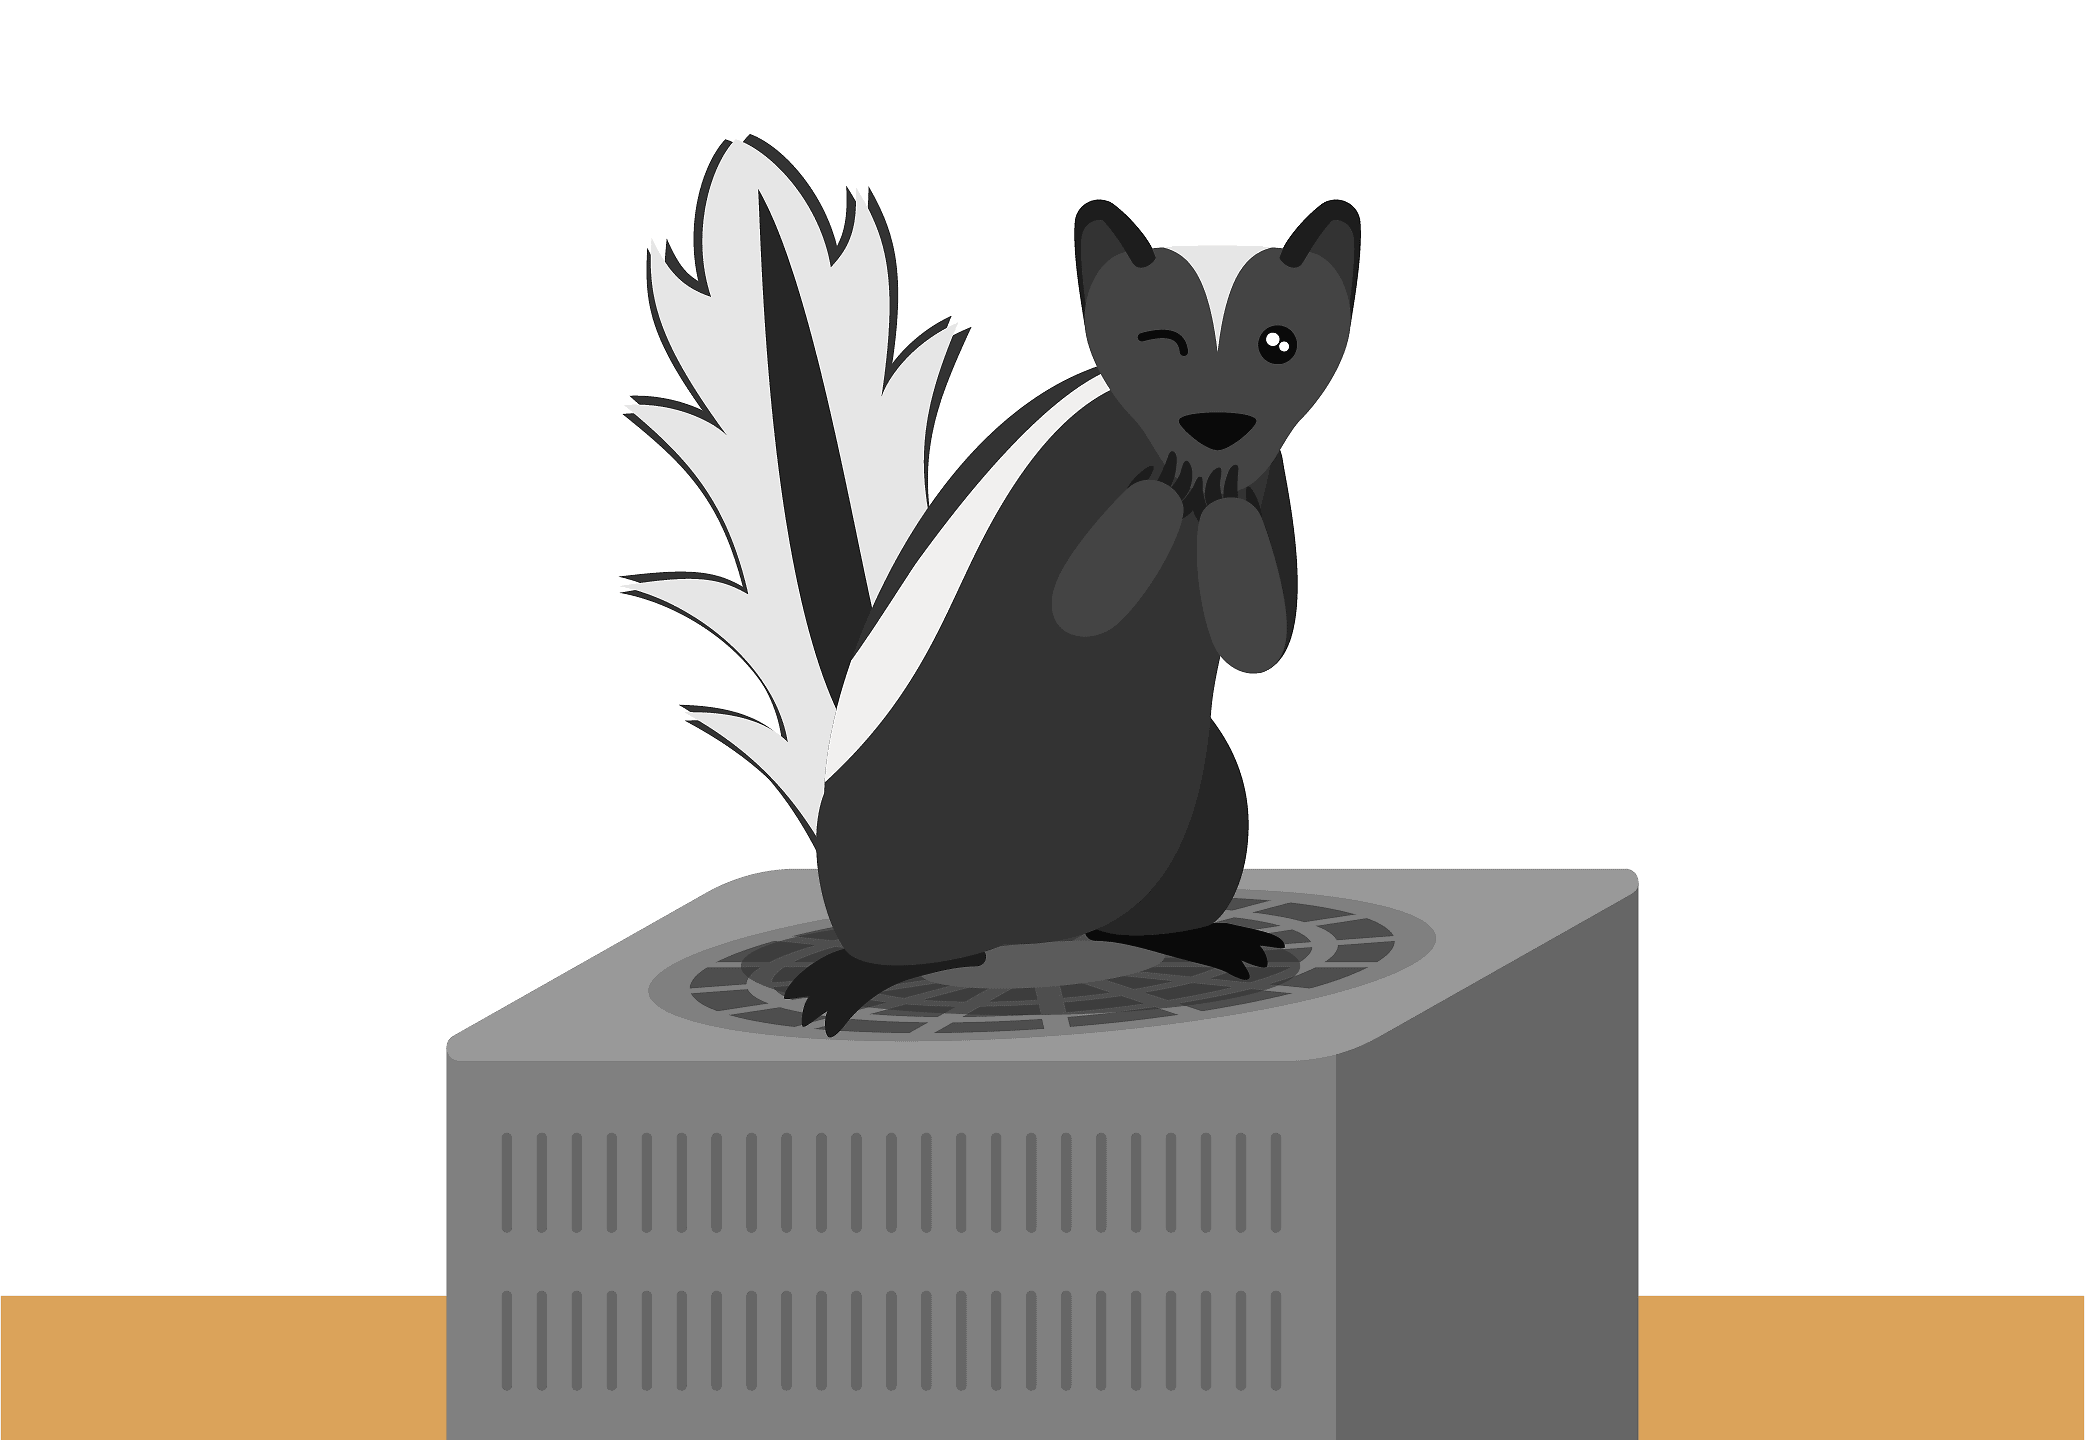 An illustrated skunk sitting on an AC unit